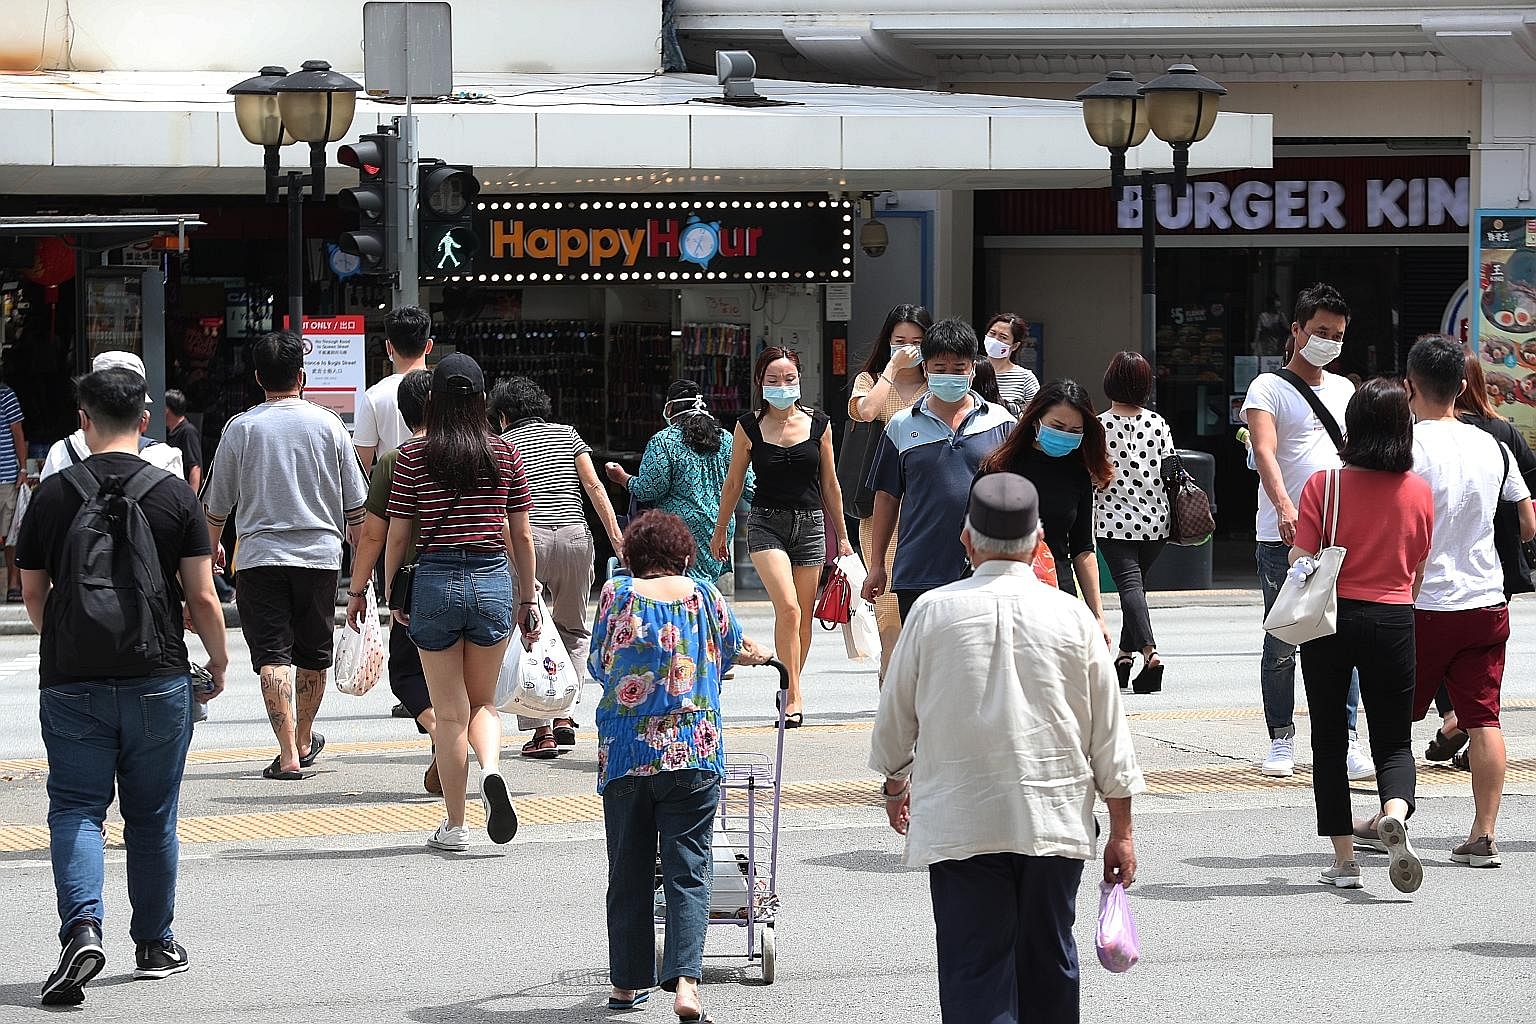 The lunch-time crowd in Bugis Street on Tuesday. More travellers are expected as Singapore gradually reopens its borders. The bustle near a bicycle rental shop in East Coast Park last Friday. Covid-19 task force co-chair Lawrence Wong said Singapore 